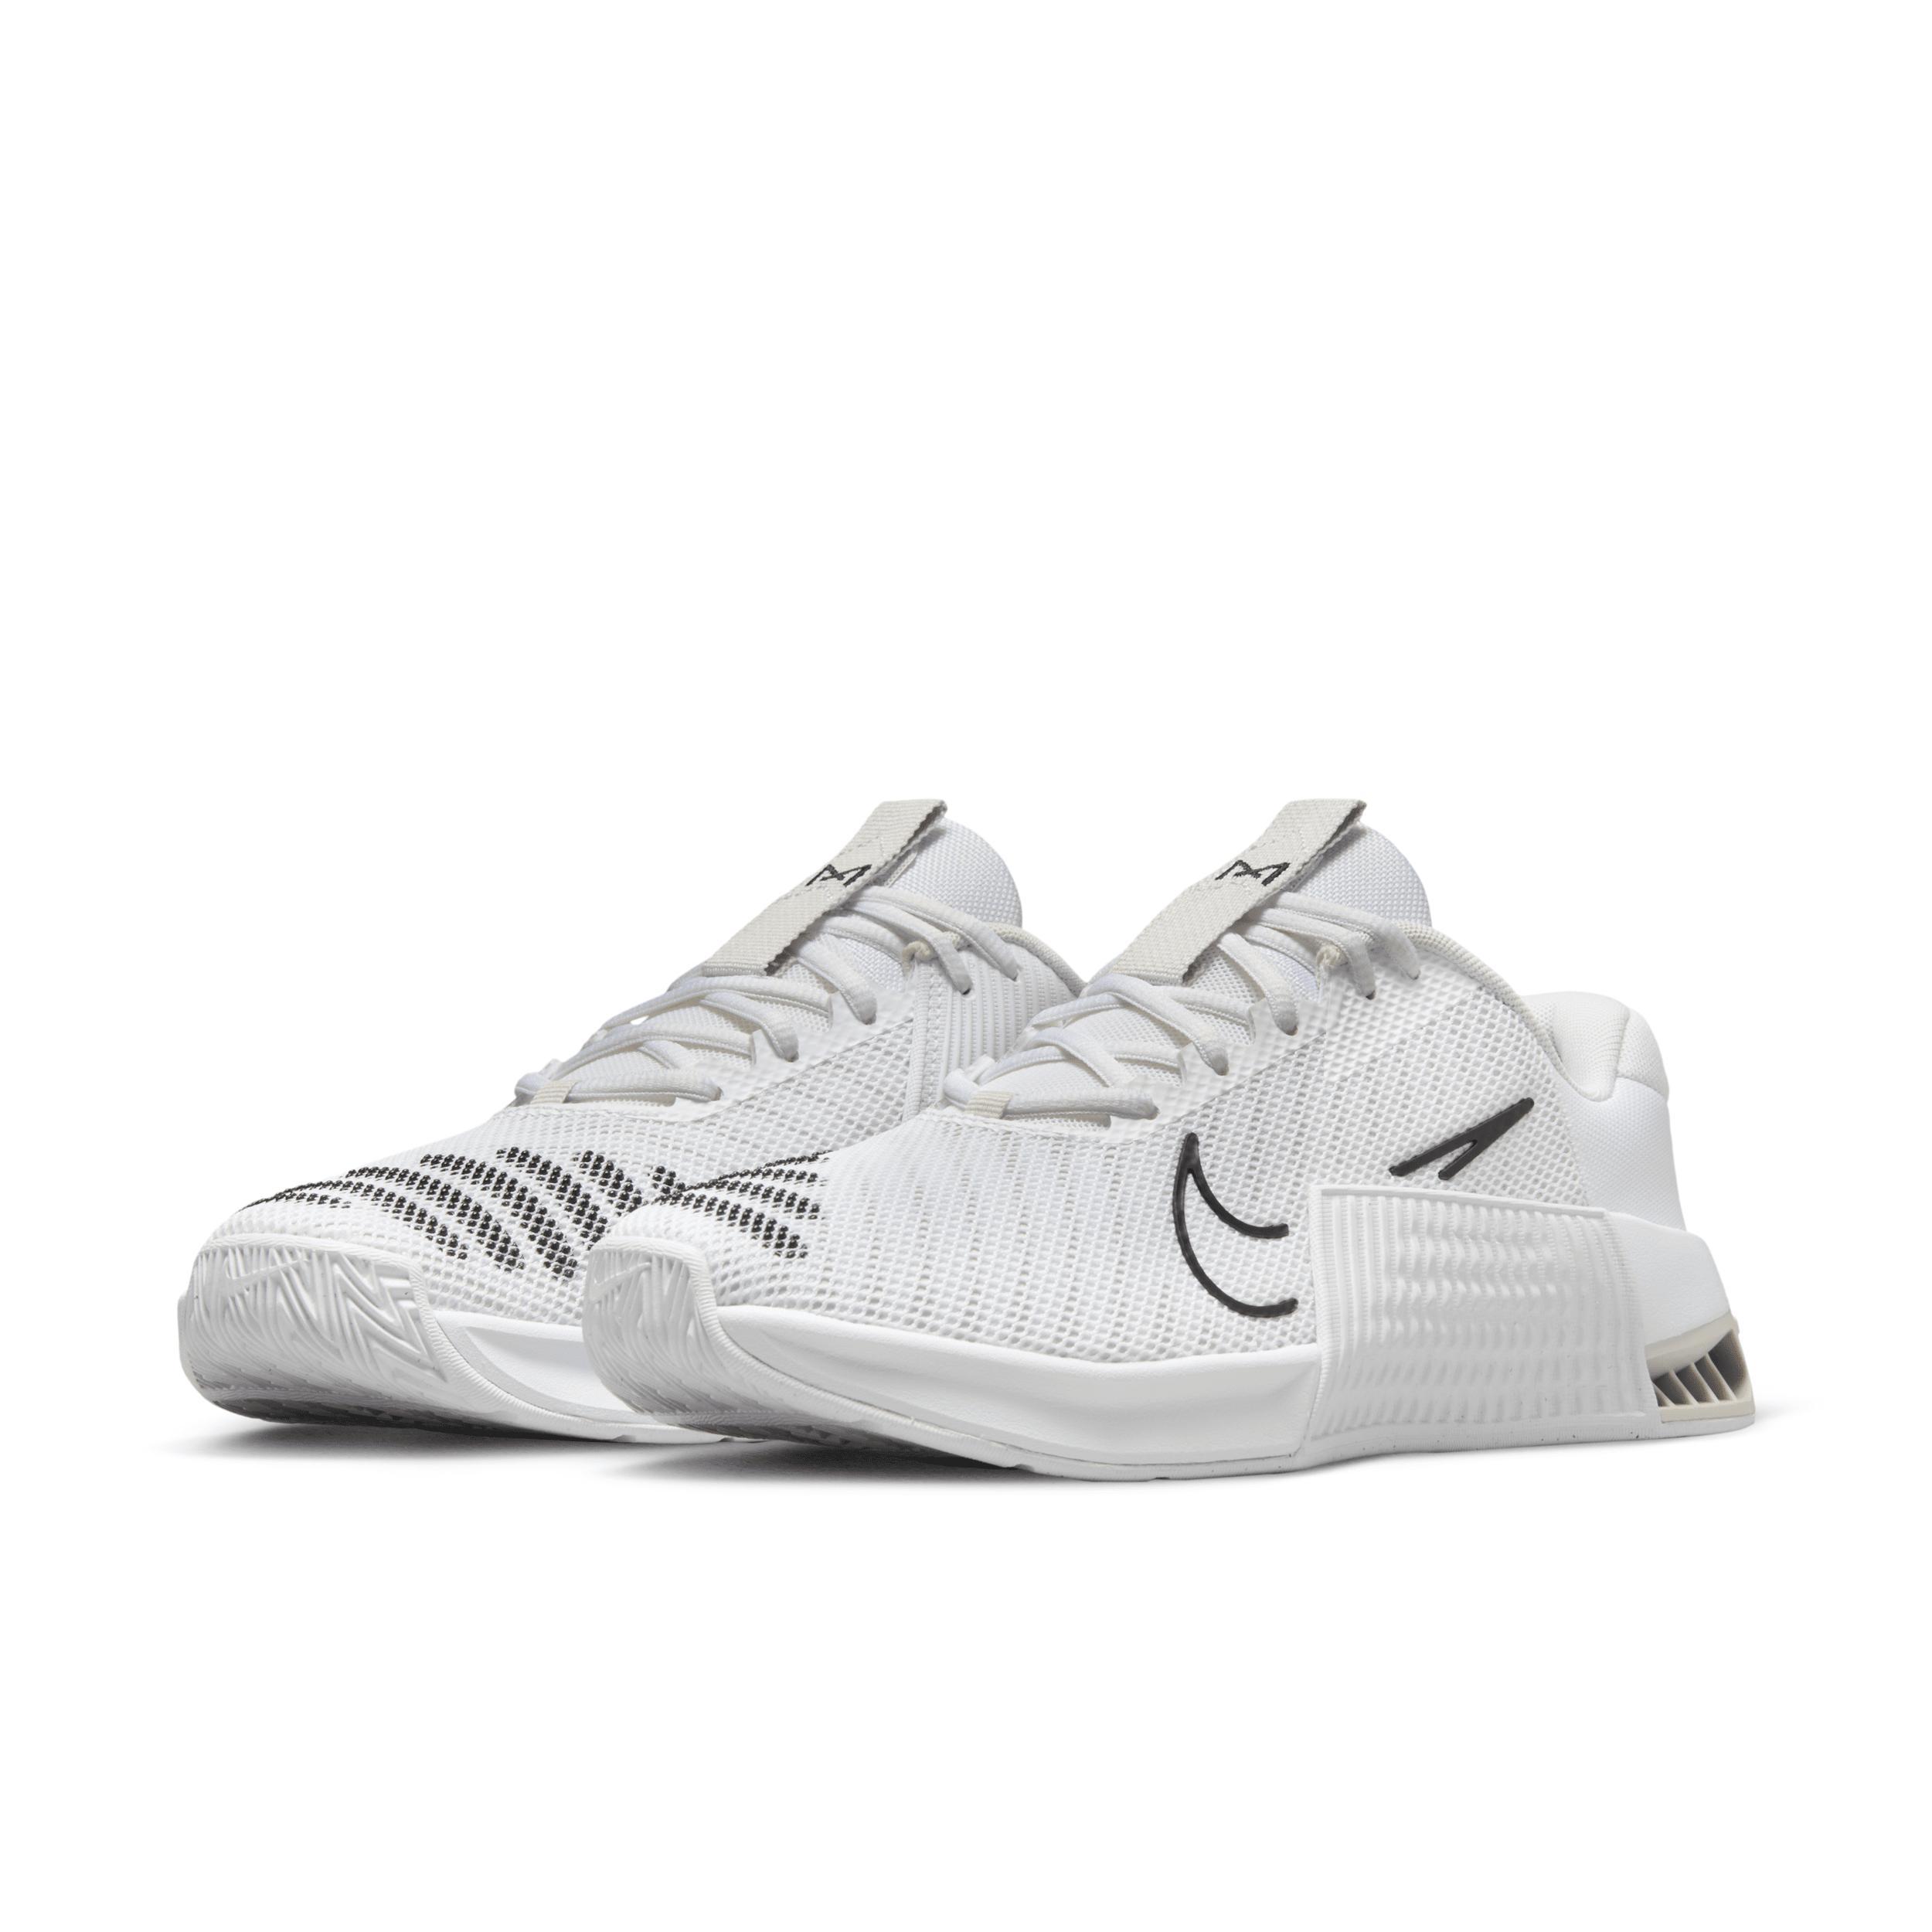 Nike Men's Metcon 9 TB Workout Shoes Product Image